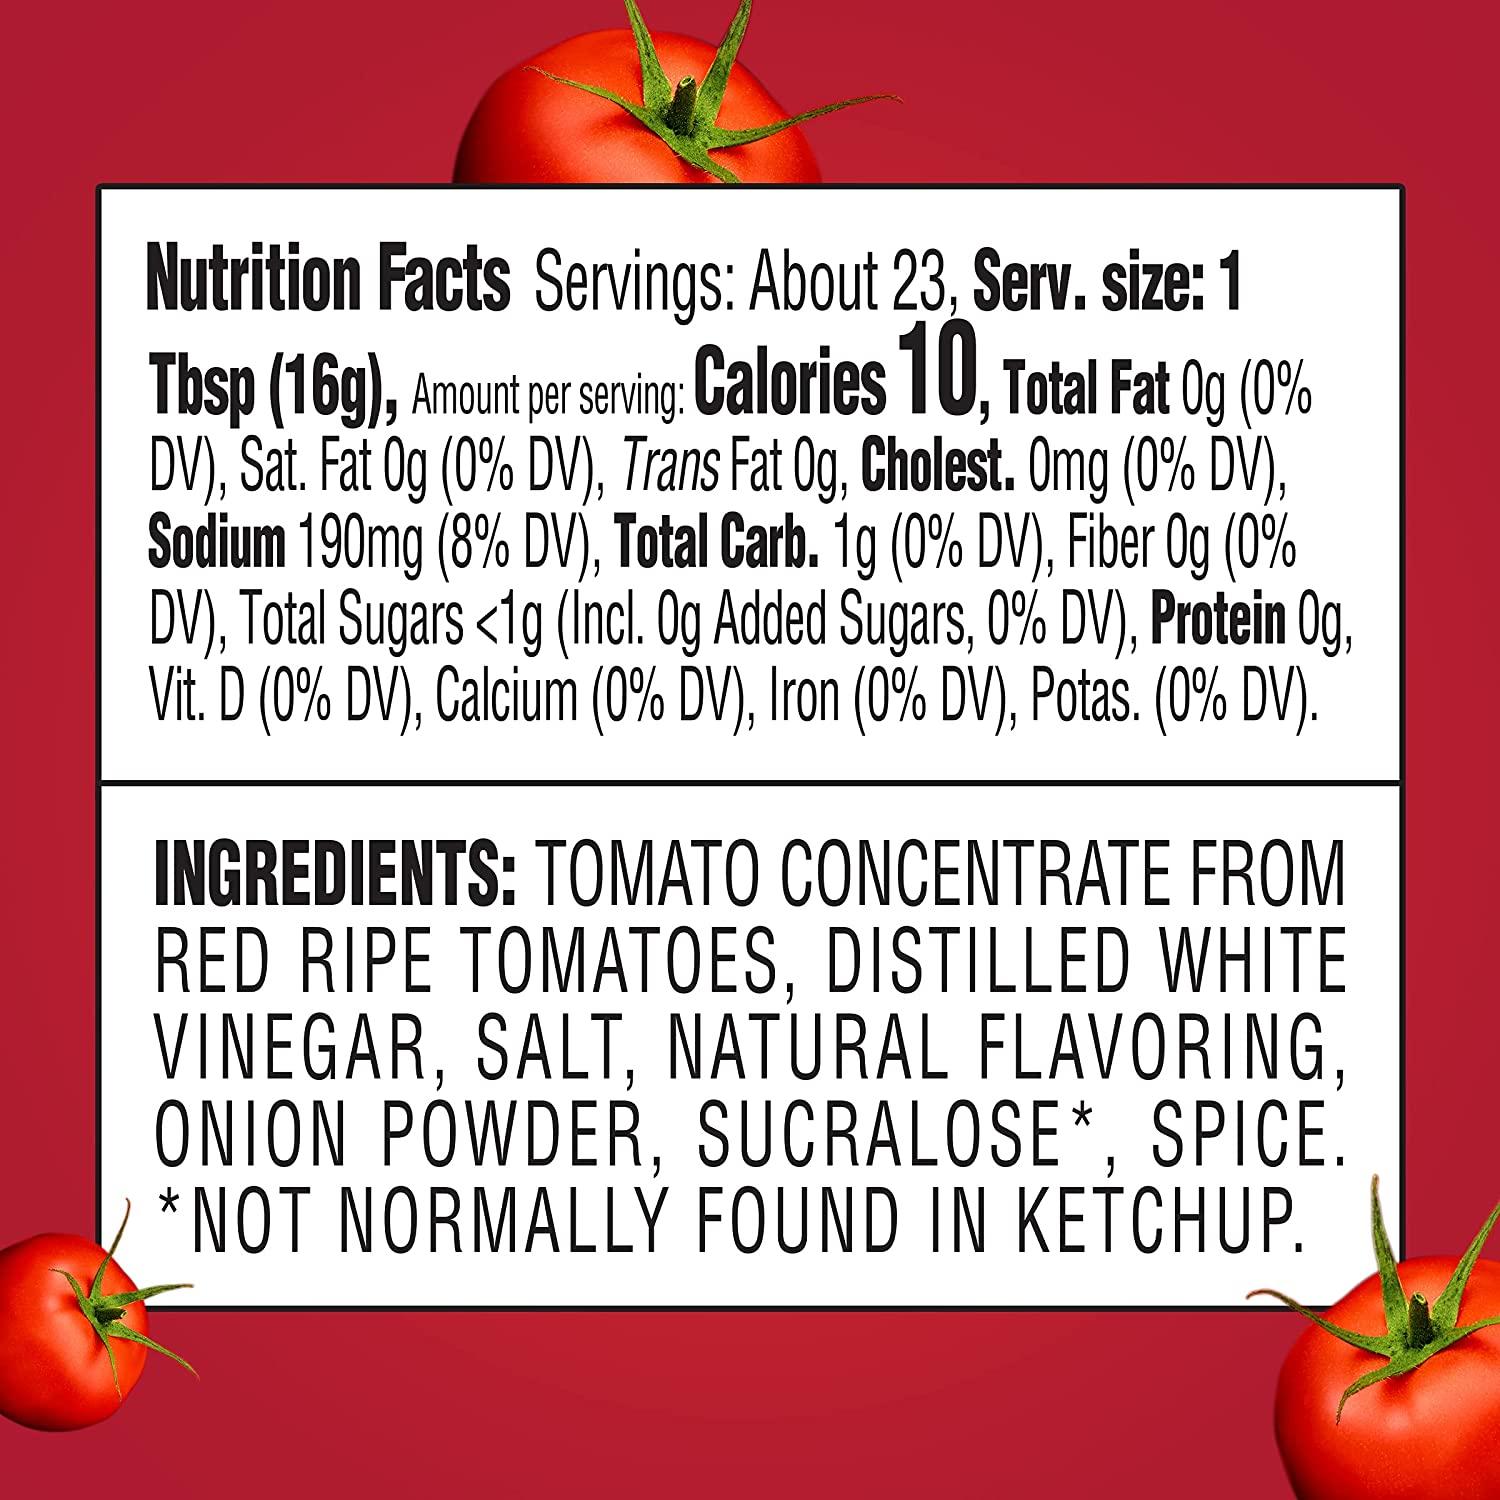 Heinz Tomato Ketchup with No Sugar Added (6 ct Pack, 13 oz Bottles)